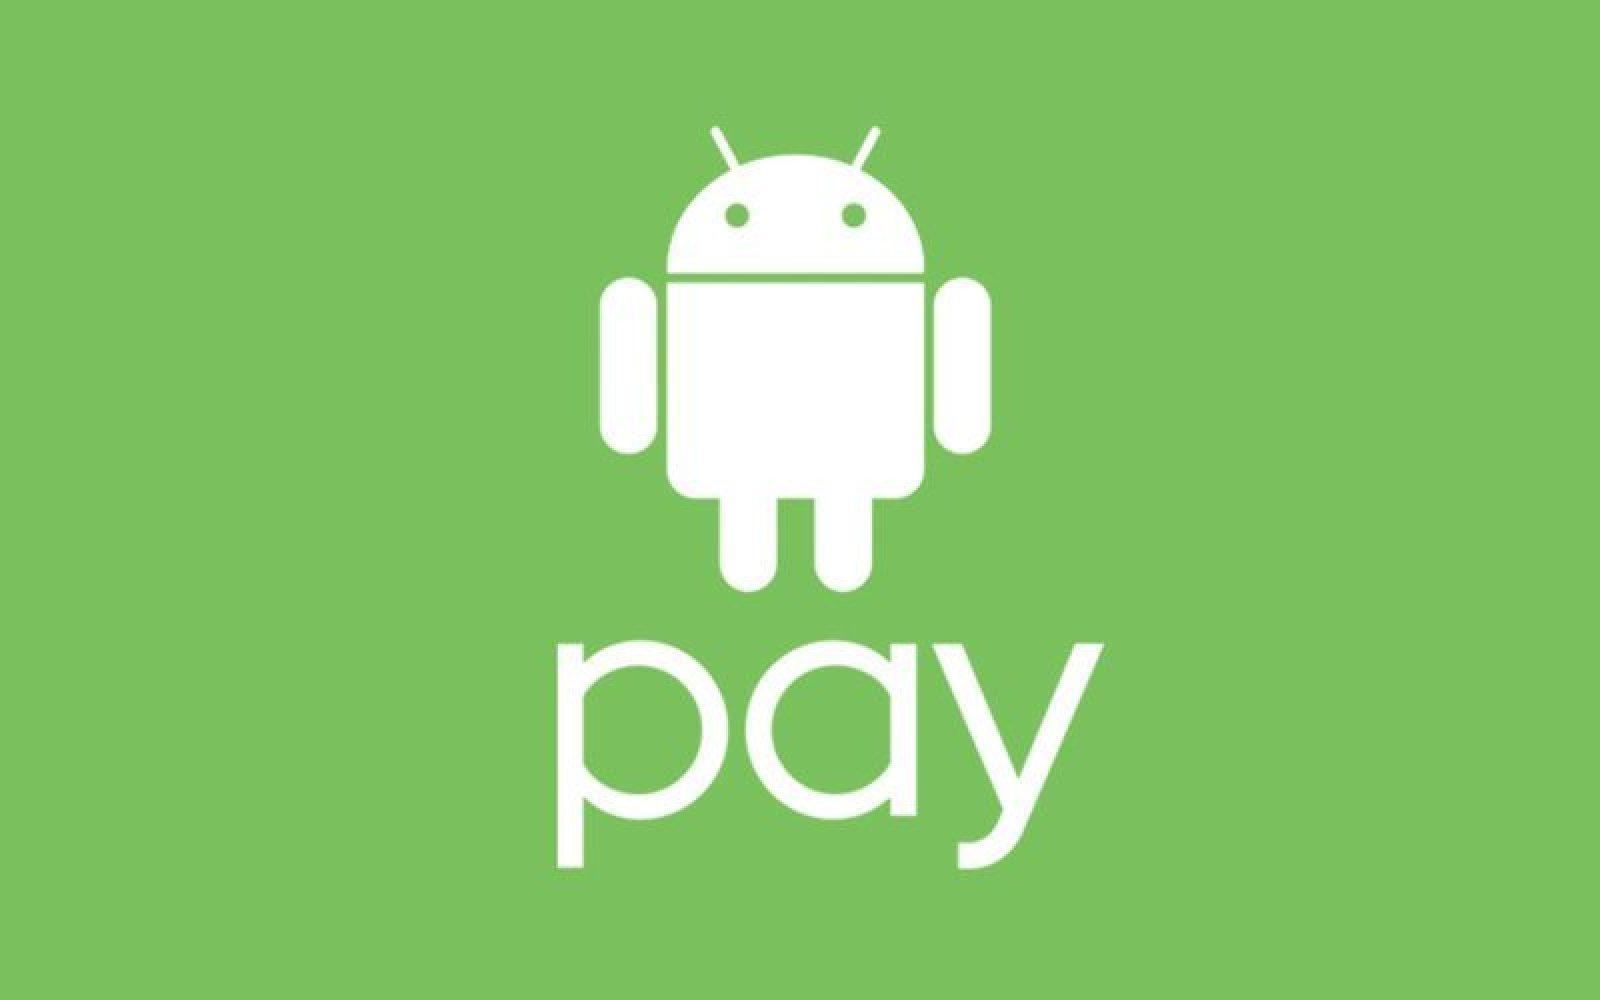 Android Pay Logo - 13 more banks add support for Android Pay - 9to5Google